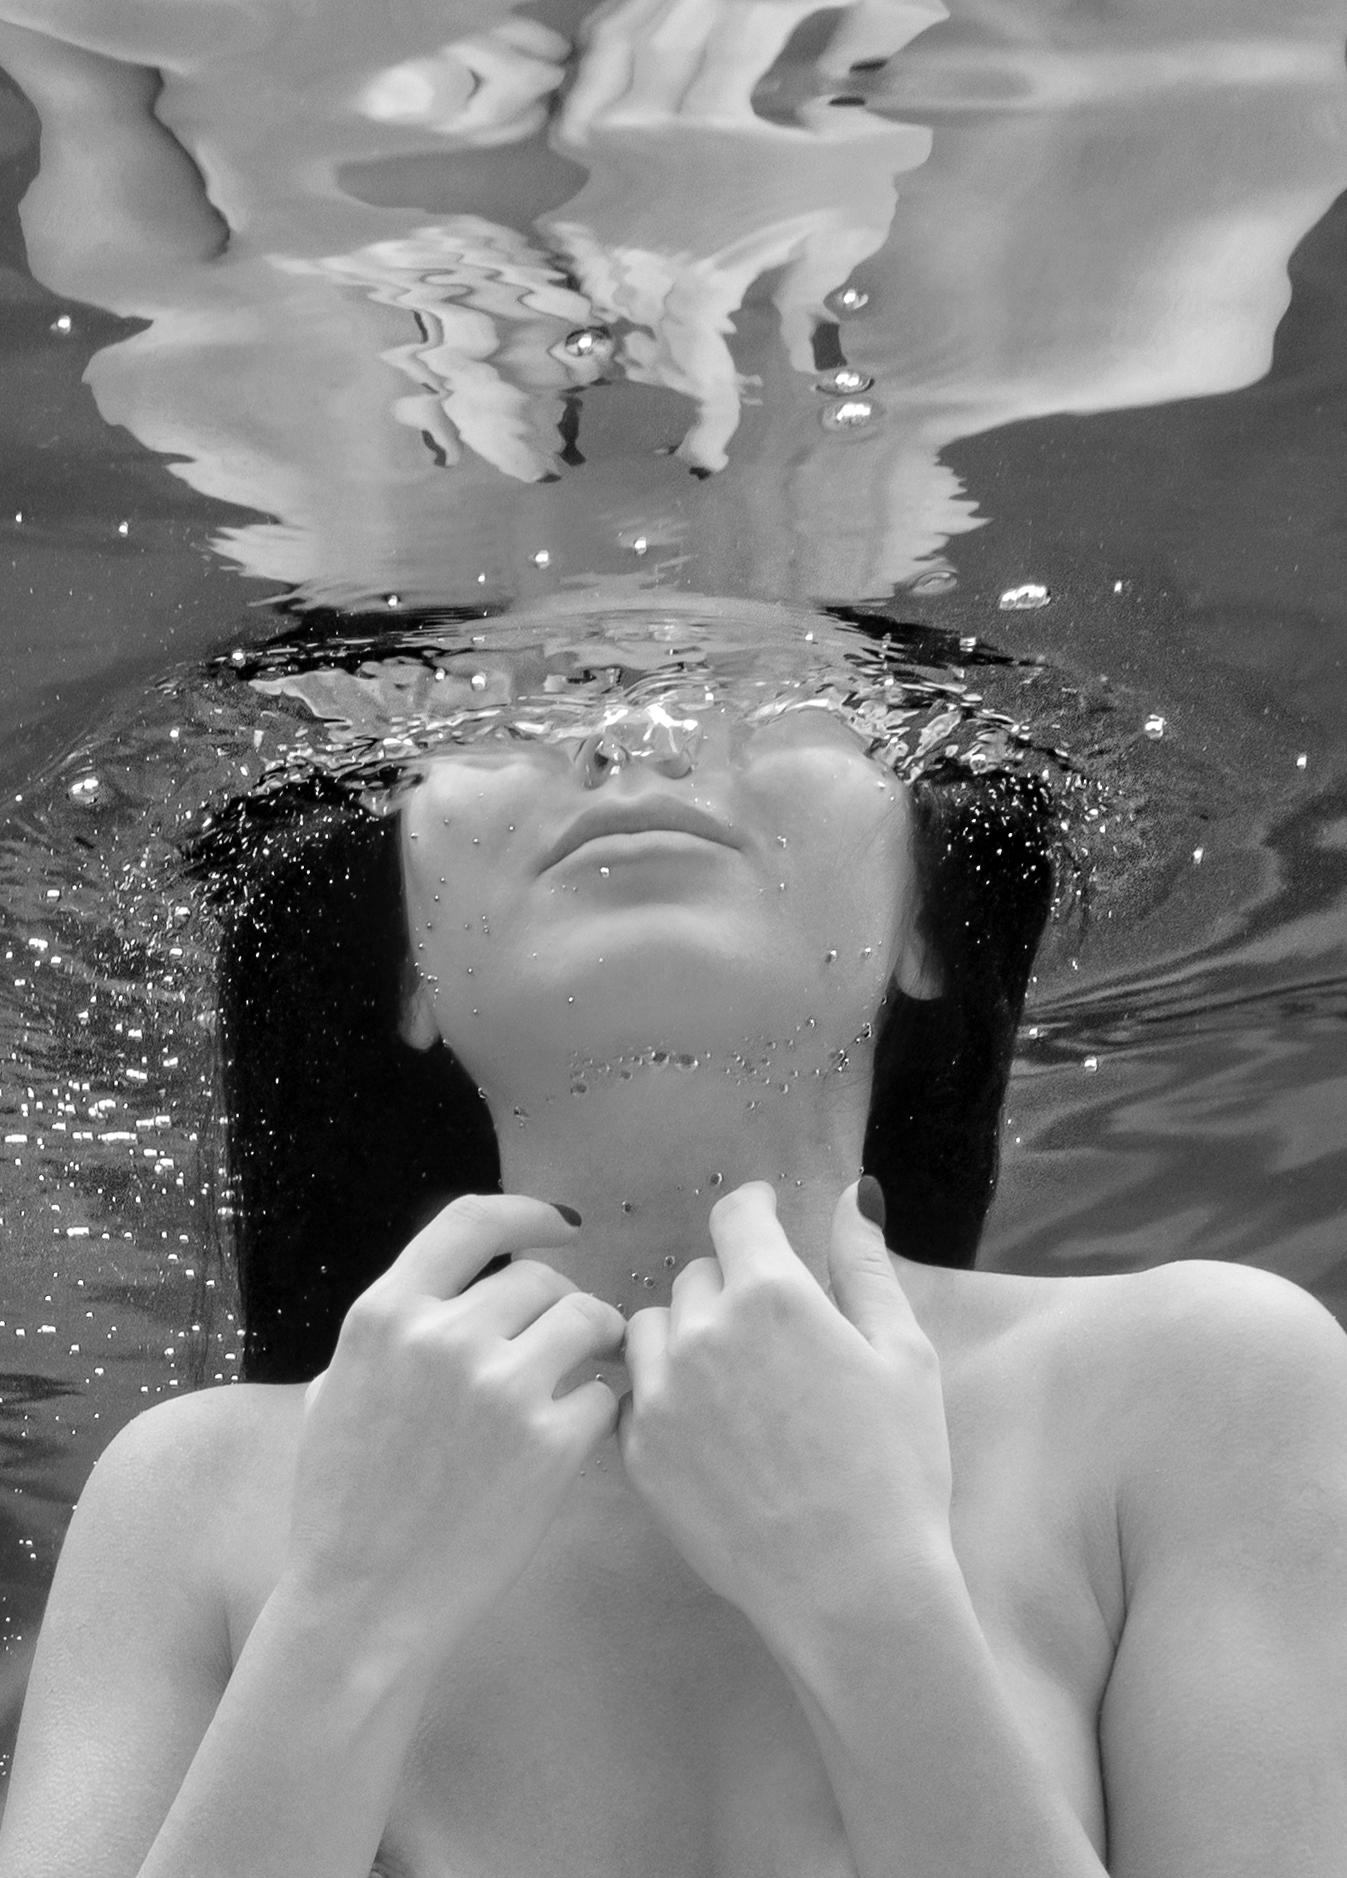 Alex Sher Black and White Photograph - Praying Mermaid - underwater nude photograph - archival pigment print 35" x 25"